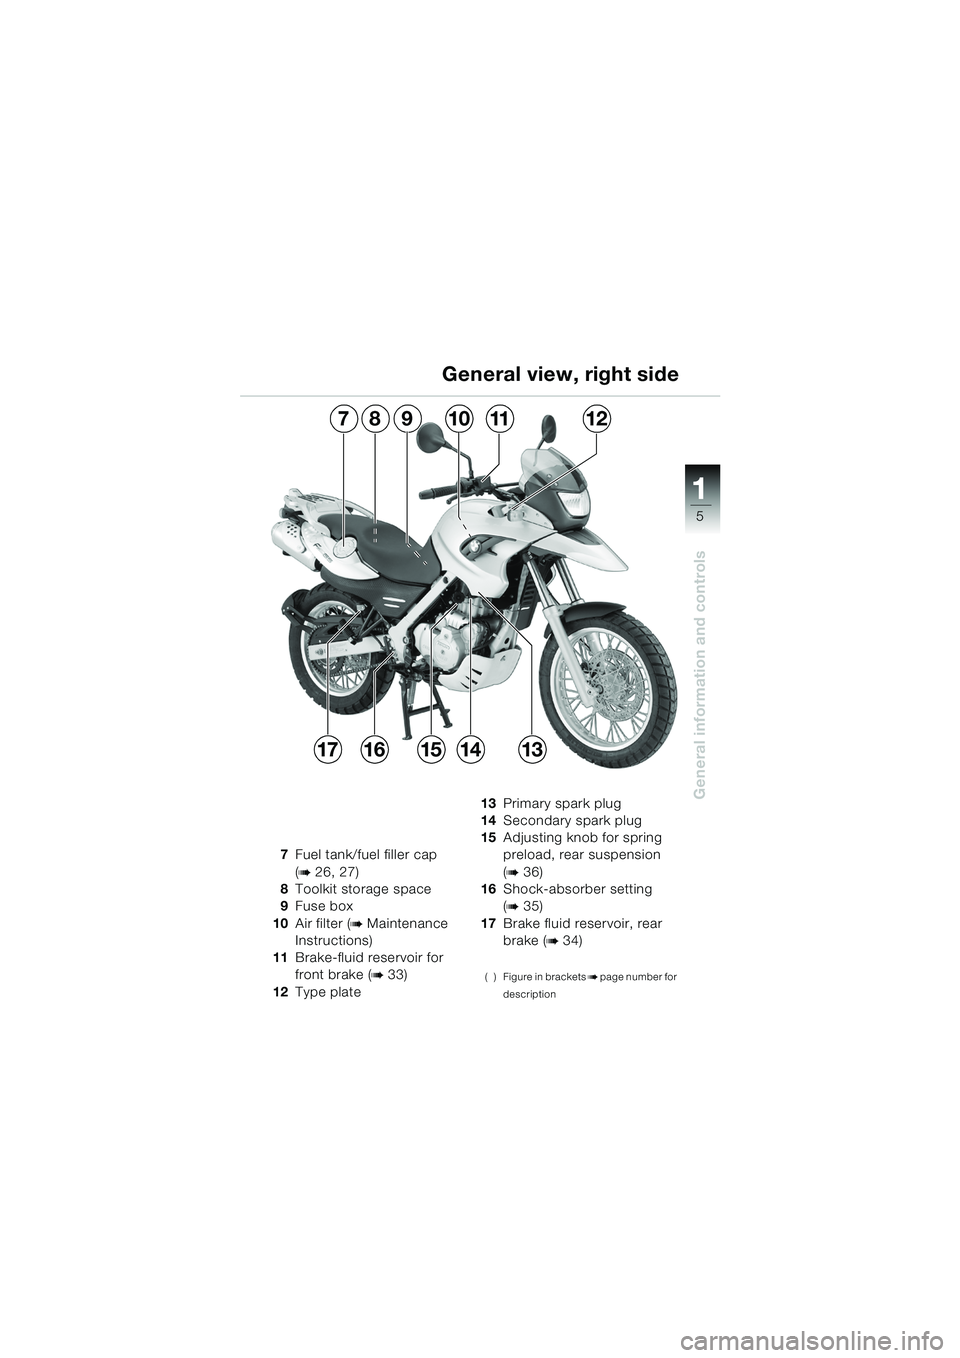 BMW MOTORRAD F 650 GS 2003  Riders Manual (in English) 111
5
General information and controls
General view, right side
7Fuel tank/fuel filler cap
(
b 26, 27)
8 Toolkit storage space
9 Fuse box
10 Air filter (
b Maintenance 
Instructions)
11 Brake-fluid re